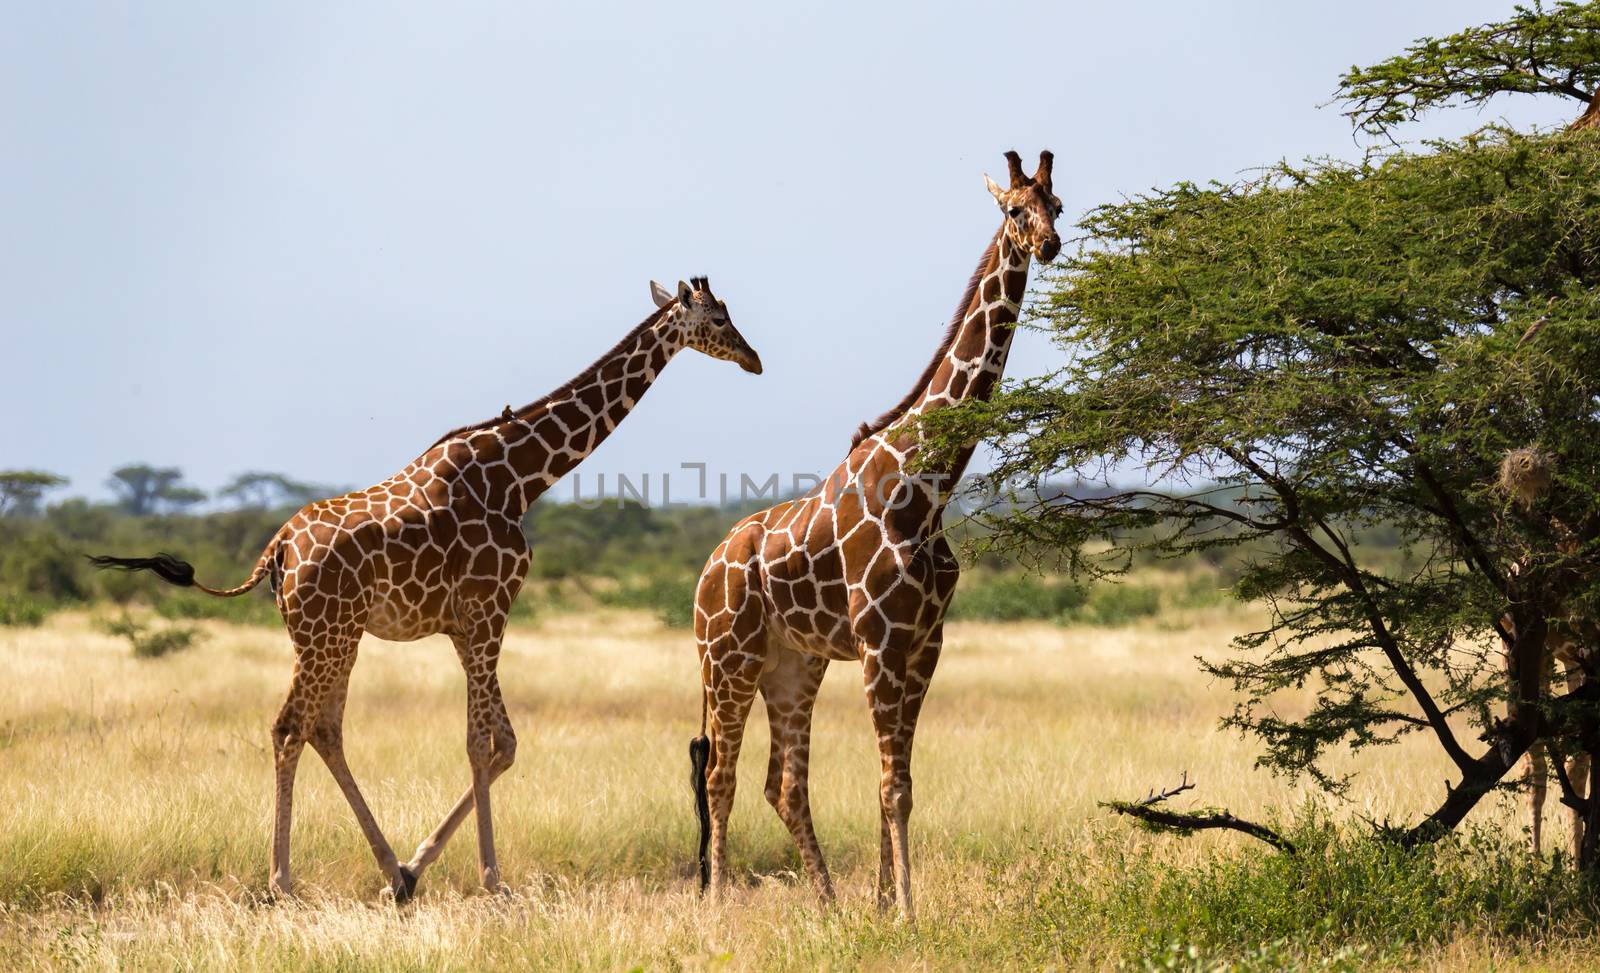 Several giraffes are walking through the grassland by 25ehaag6